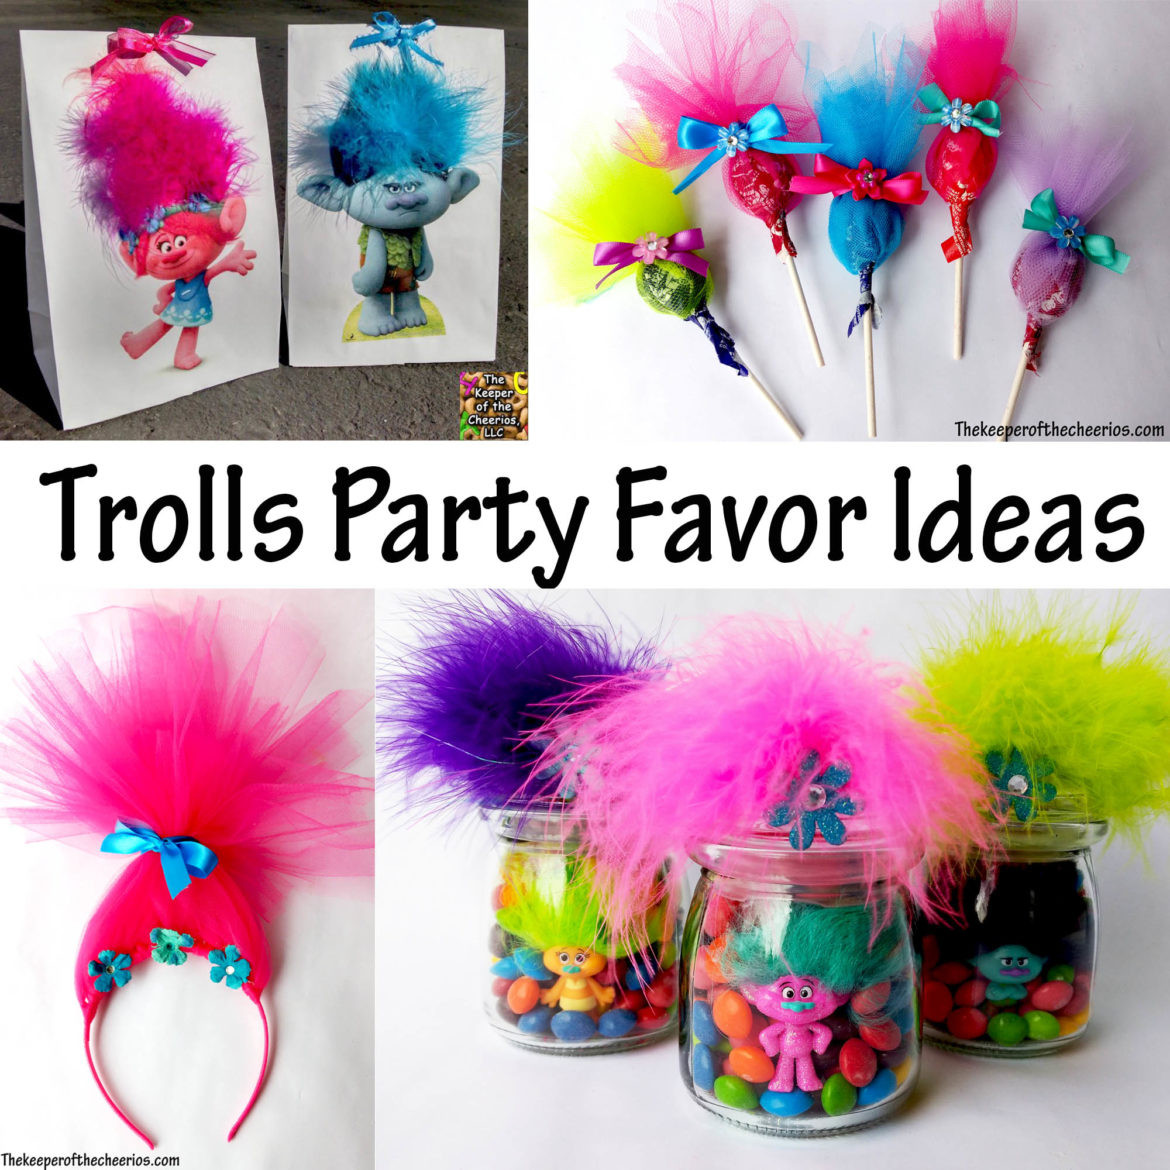 Trolls Movie Party Ideas
 Trolls Party Favor Ideas The Keeper of the Cheerios